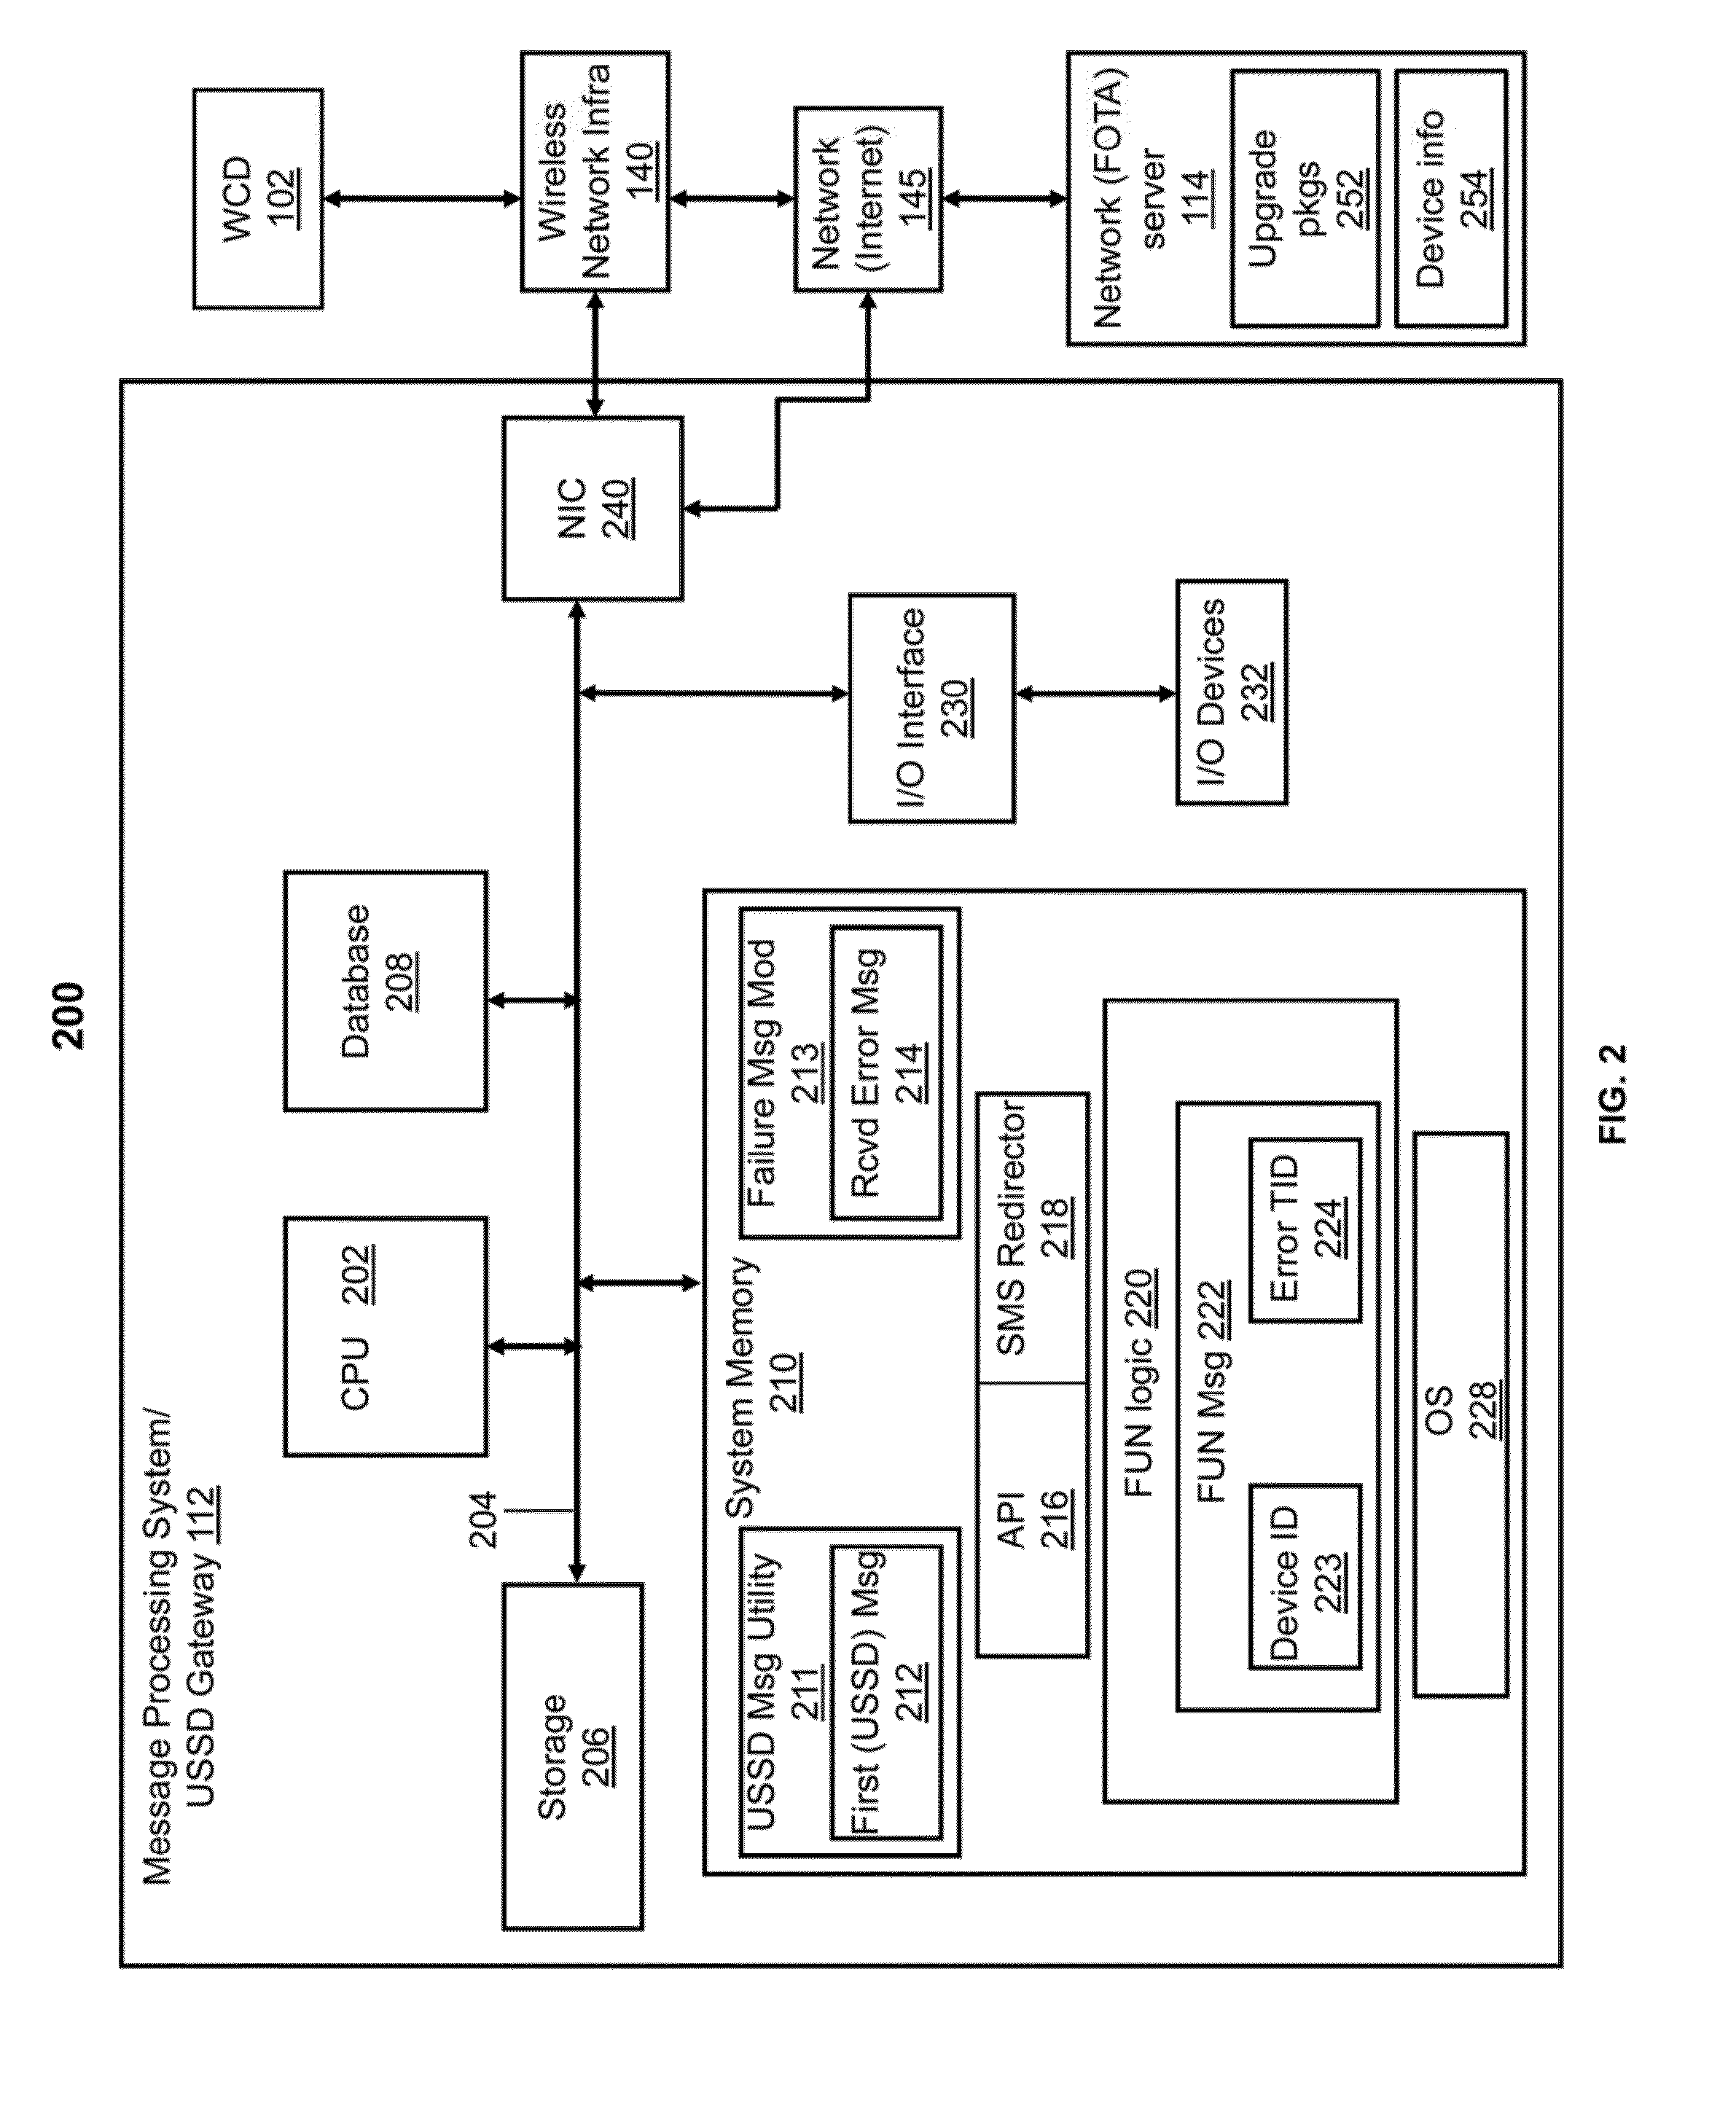 Methods and apparatus to trigger firmware update request in response to a failure event